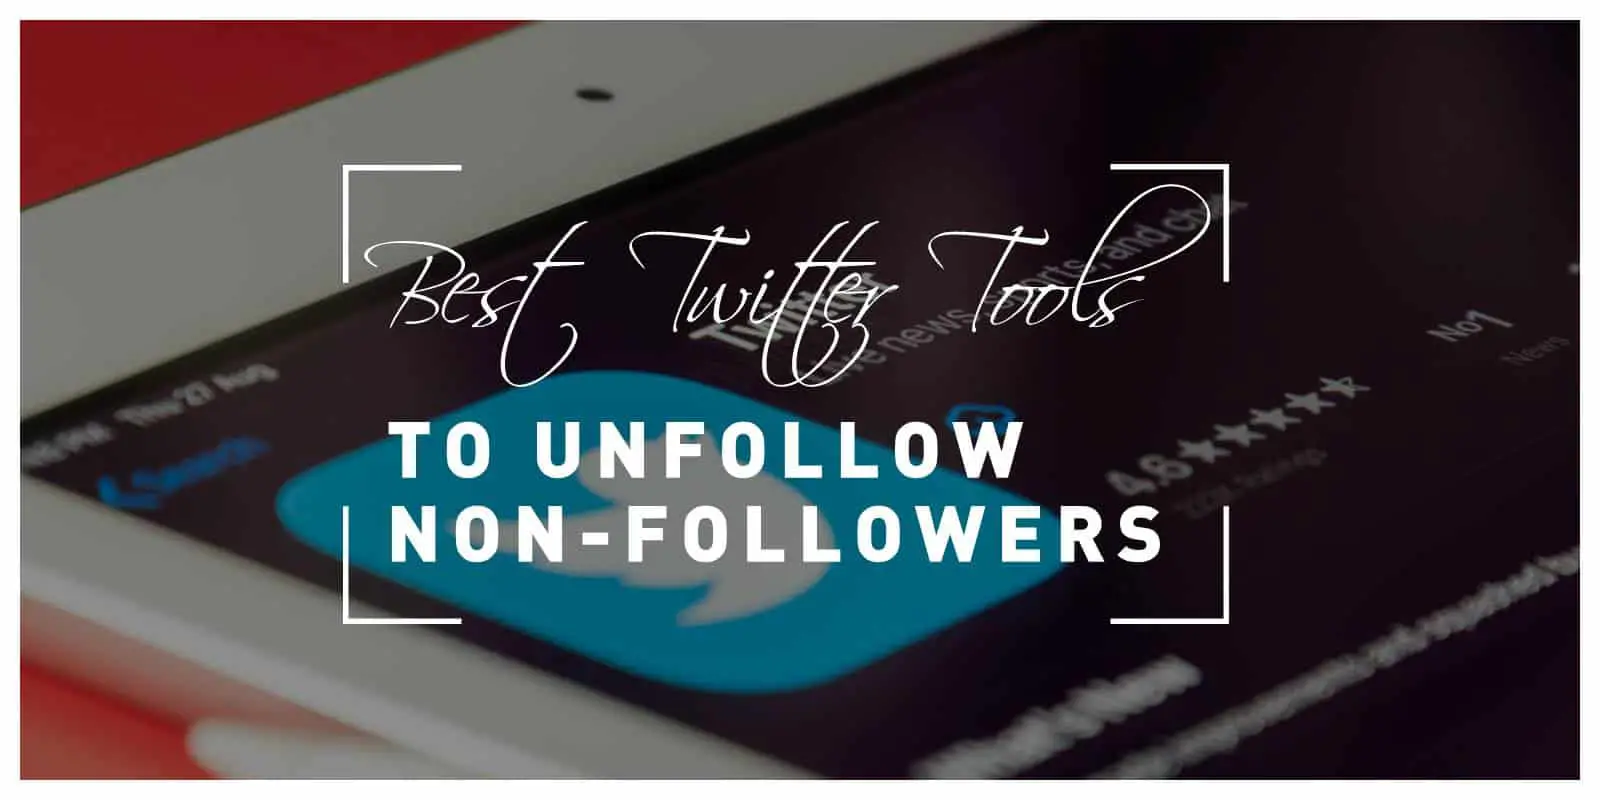 Five Best Twitter Tools to Unfollow Non-Followers